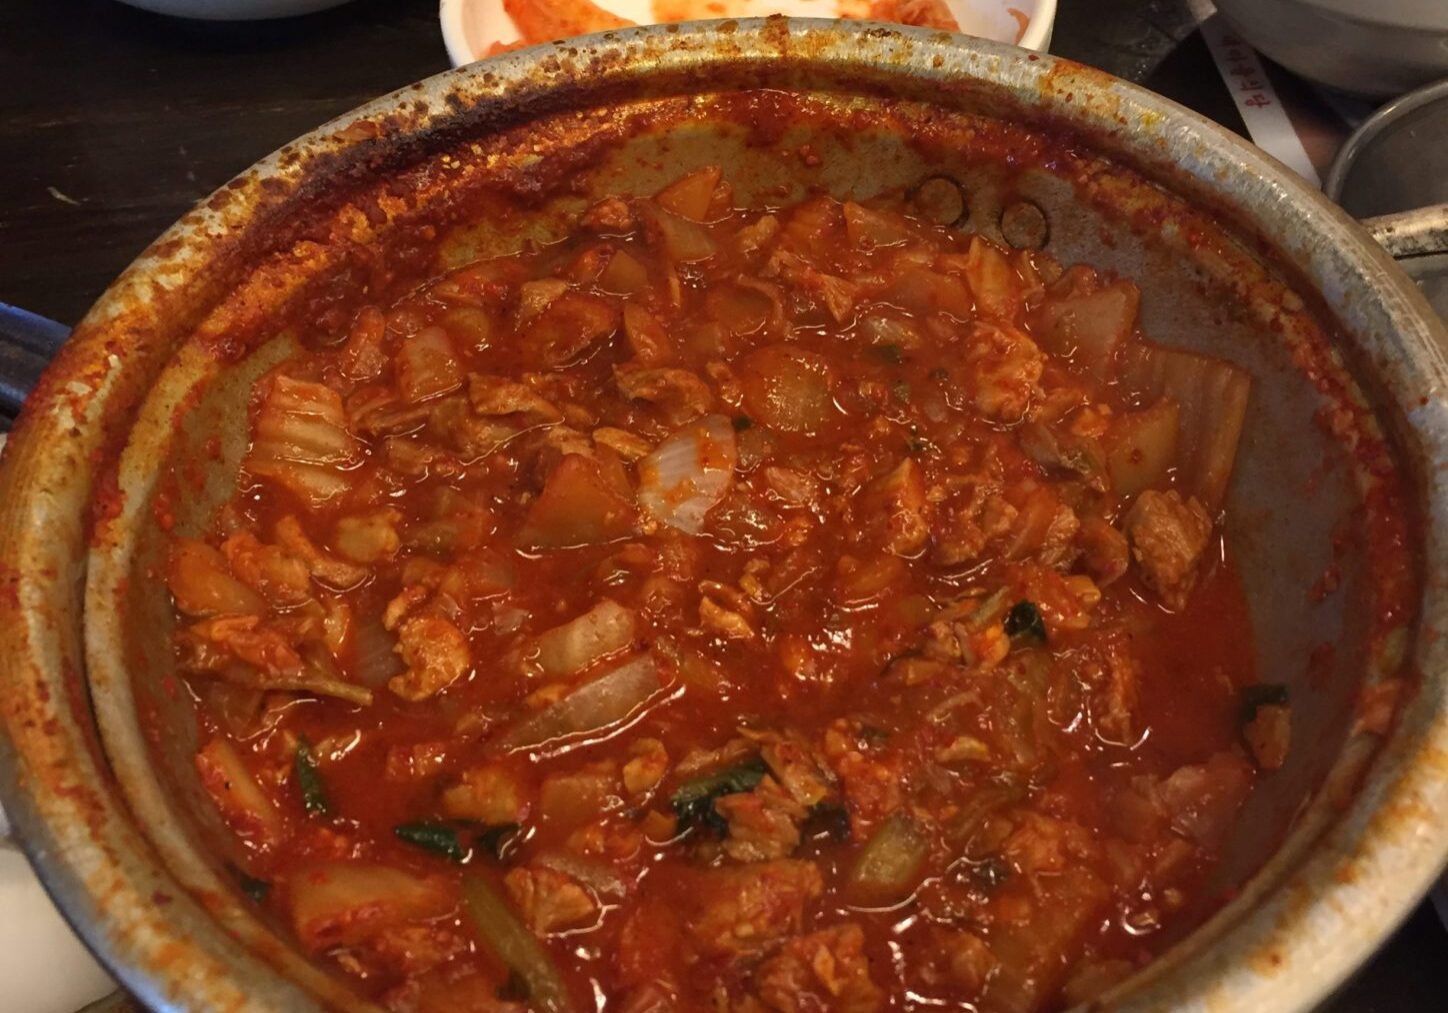 Kimchi Pork Stew - Thick and Juicy - One of the best I have tried!